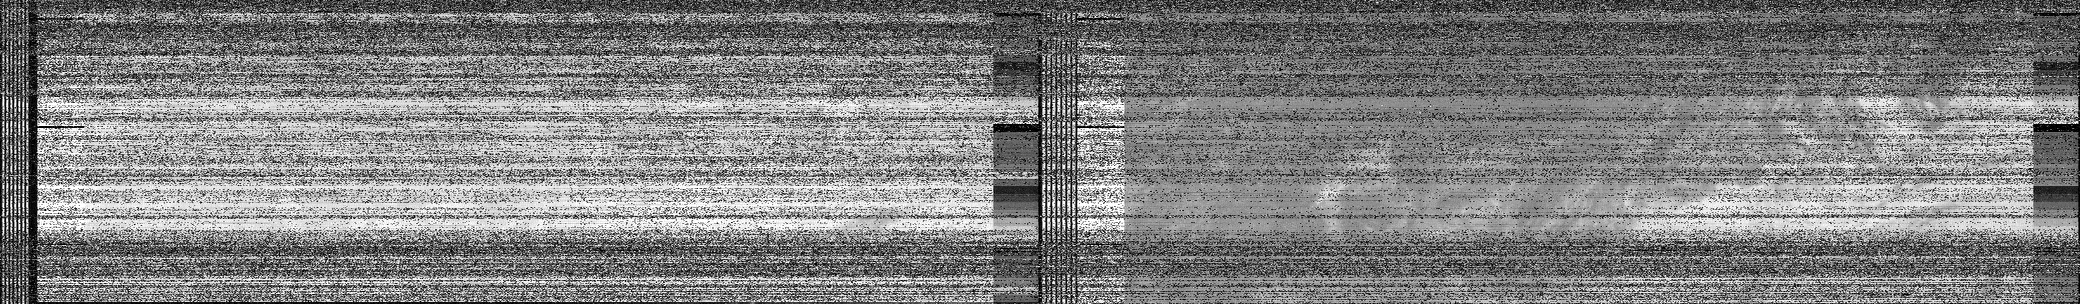   Noaa15 transmission on 4/12 16:18 at 137.623Mhz